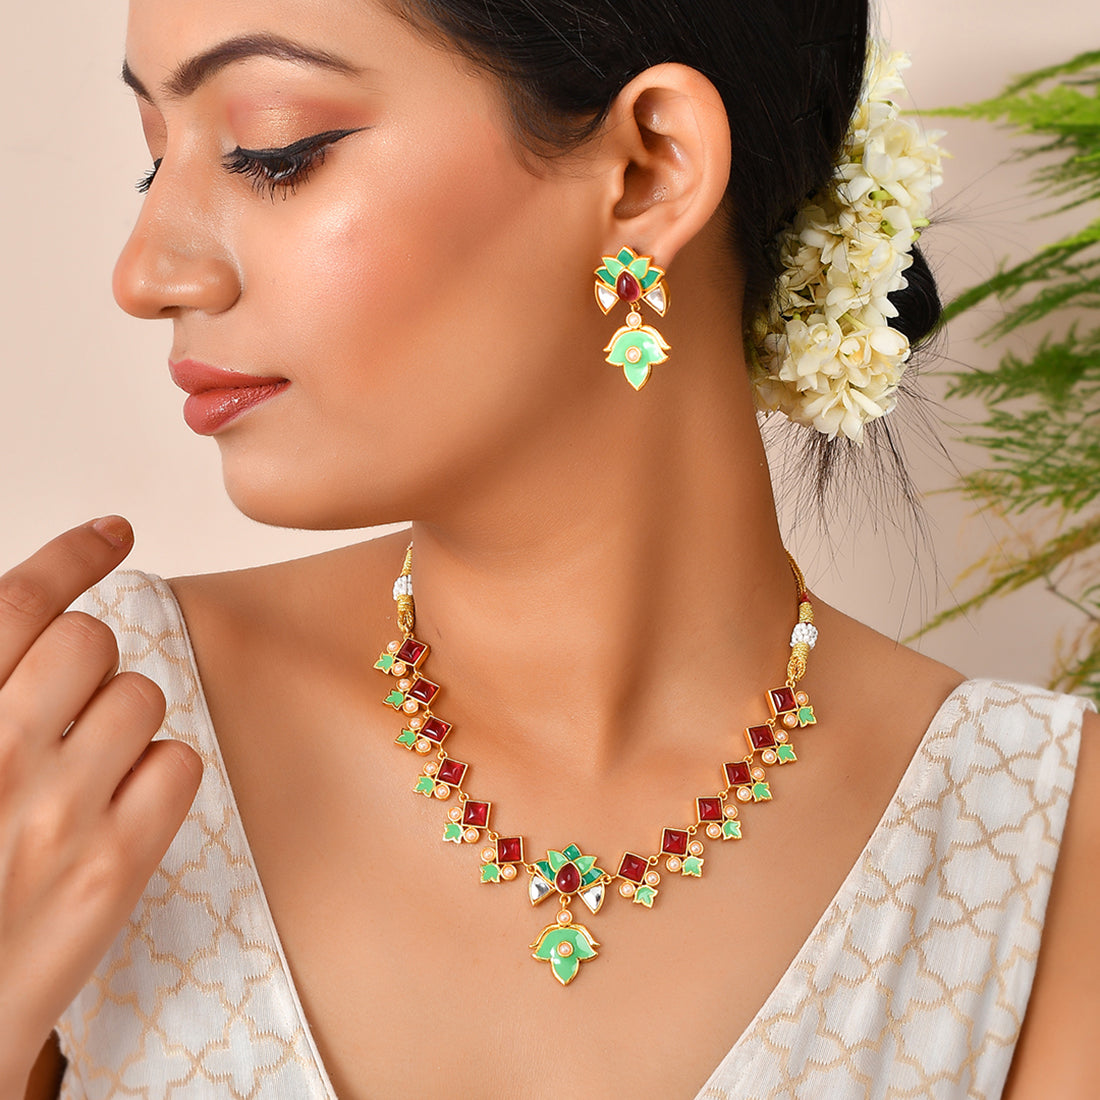 Forever More Pink Stones and Pearls Green Enamel Jewellery Set